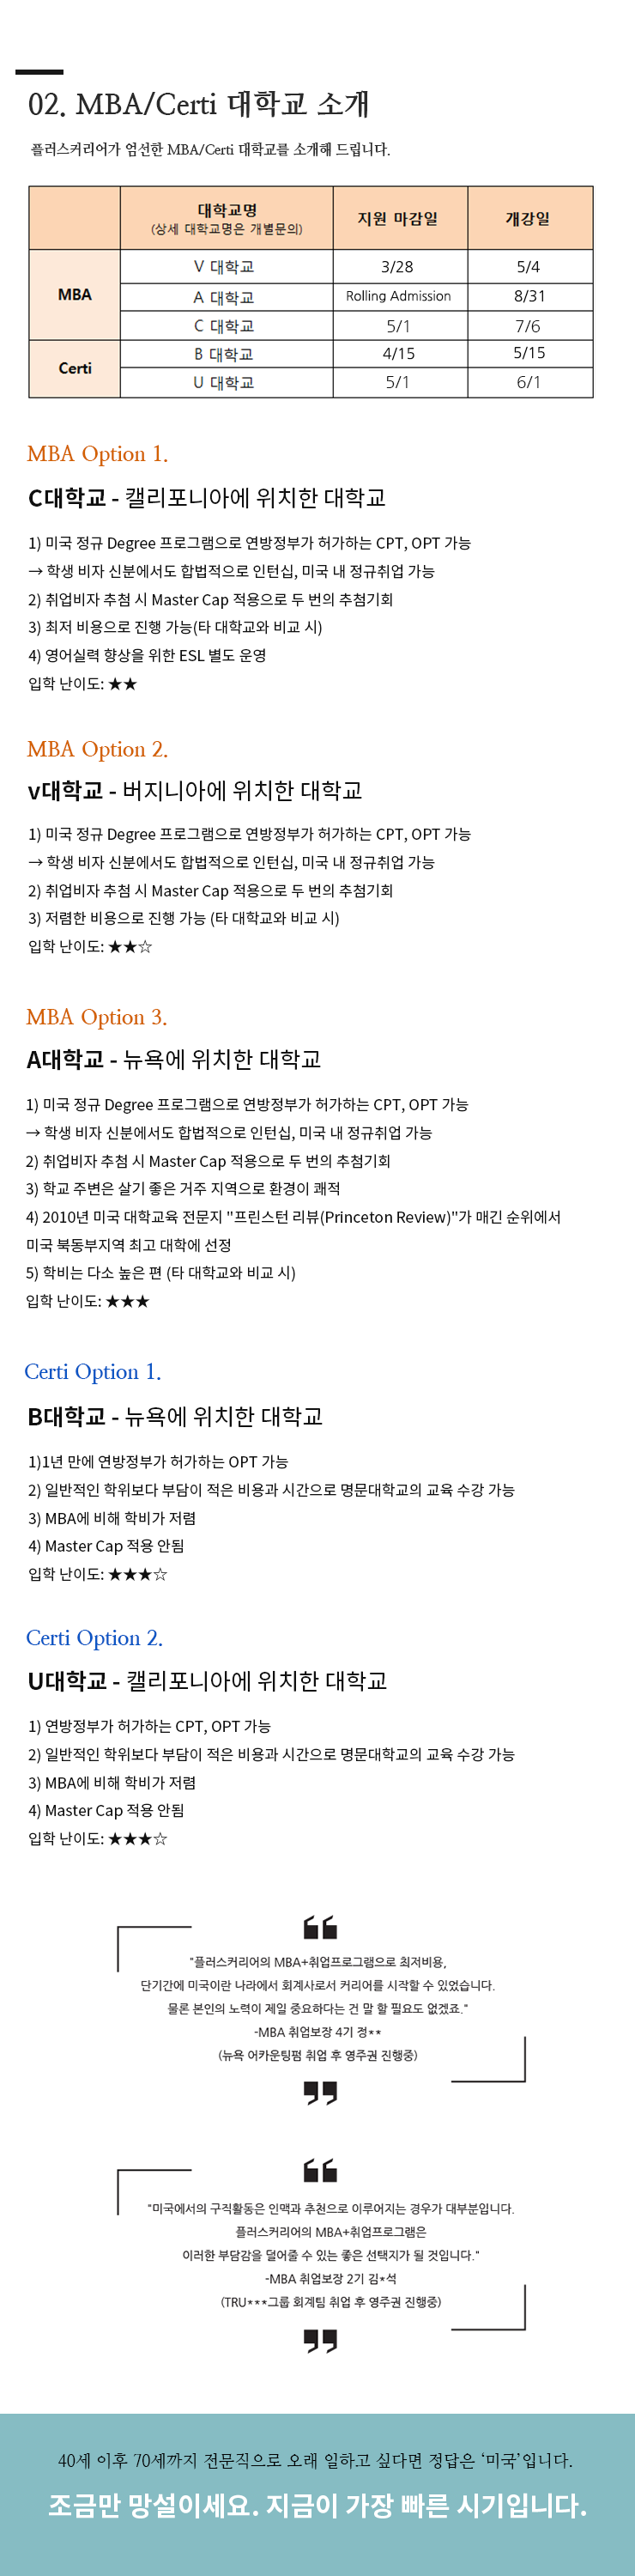 mba7기(수정) .png